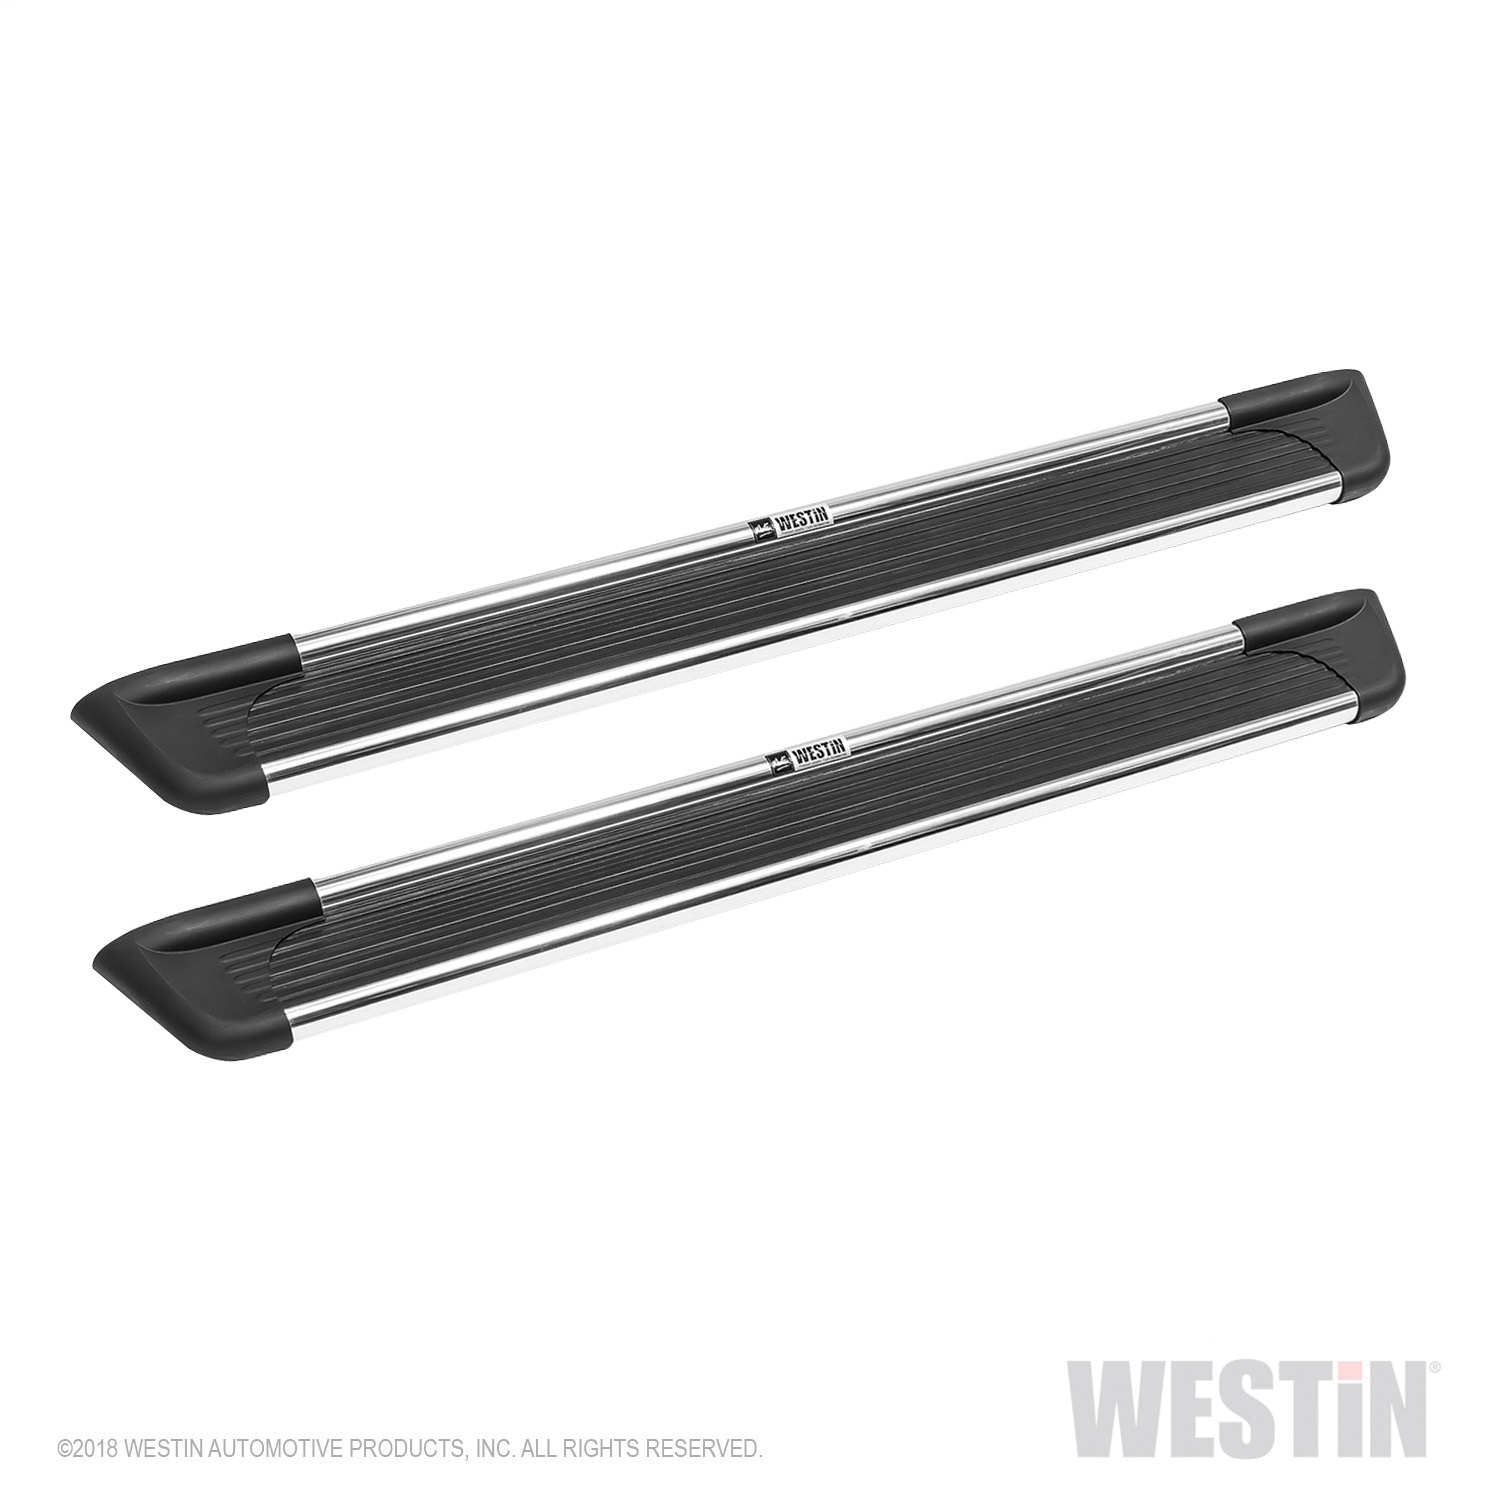 Westin Sure-Grip Running Boards, Brushed Aluminum, 69 In. Length, Does Not Include Mount Kit,